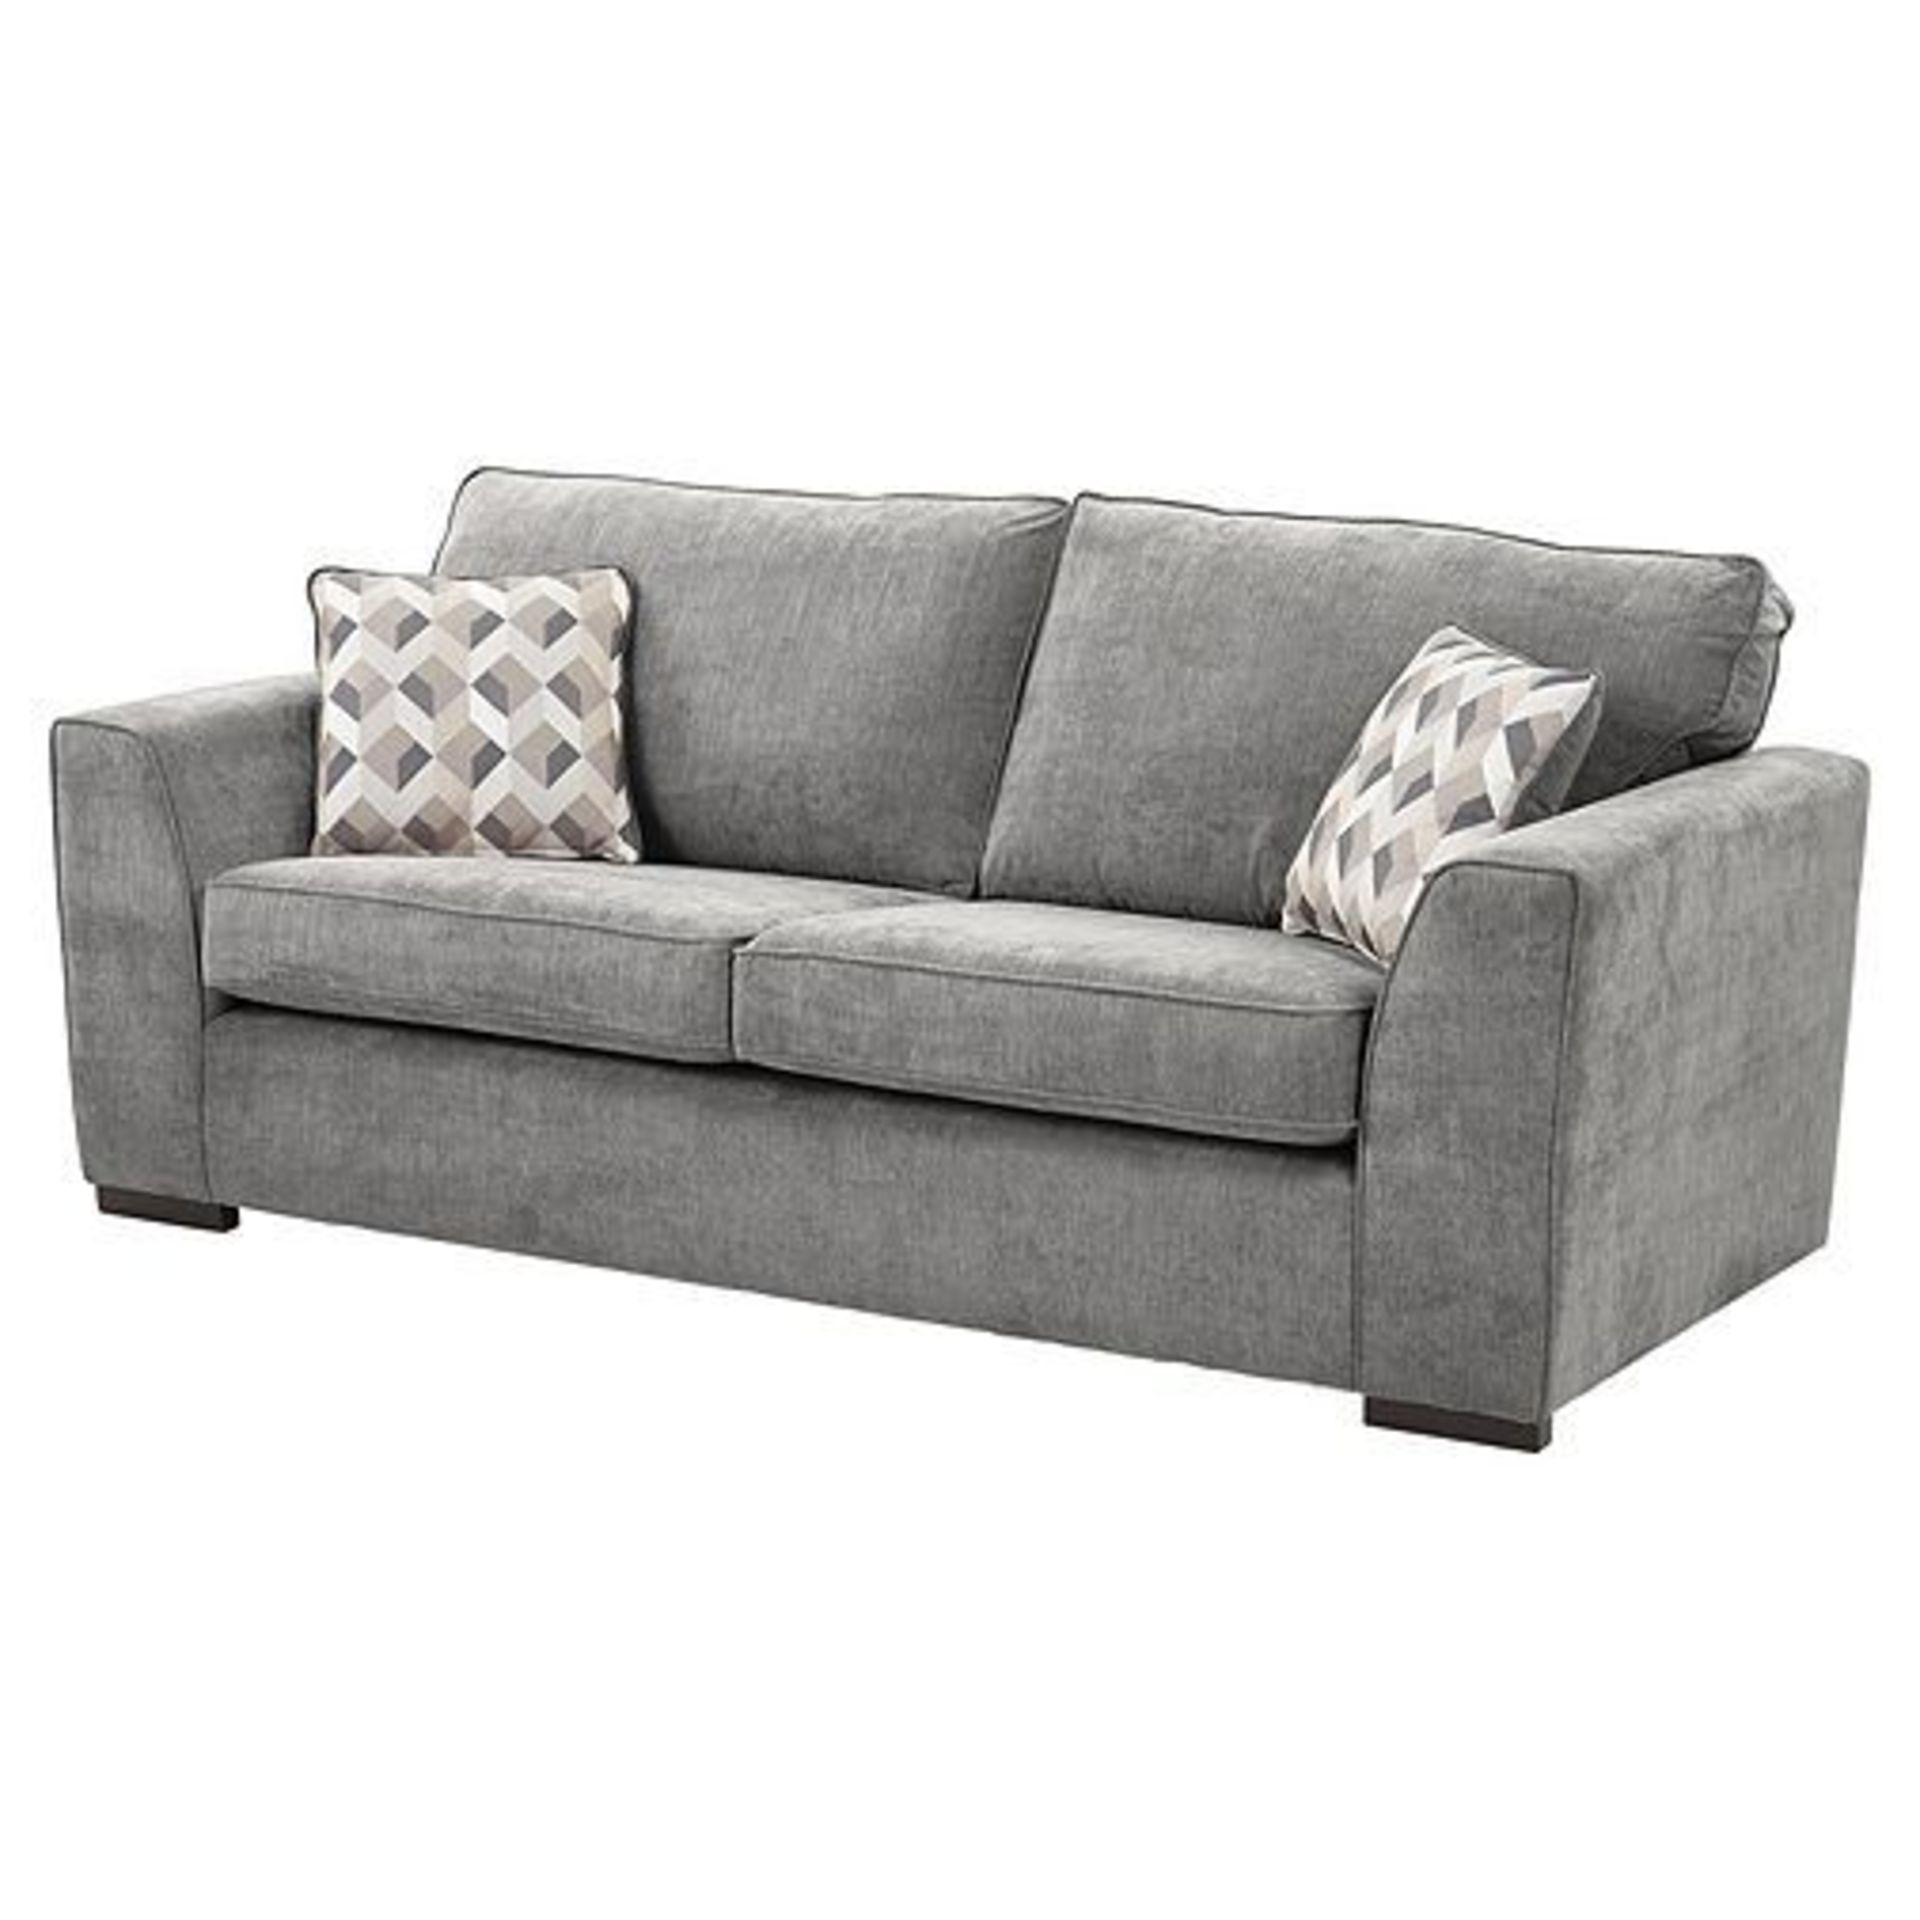 1 BRAND NEW BAGGED BOSTON MEDIUM 2.5 SEATER SOFA IN DARK GREY / CTS07907 (VIEWING HIGHLY